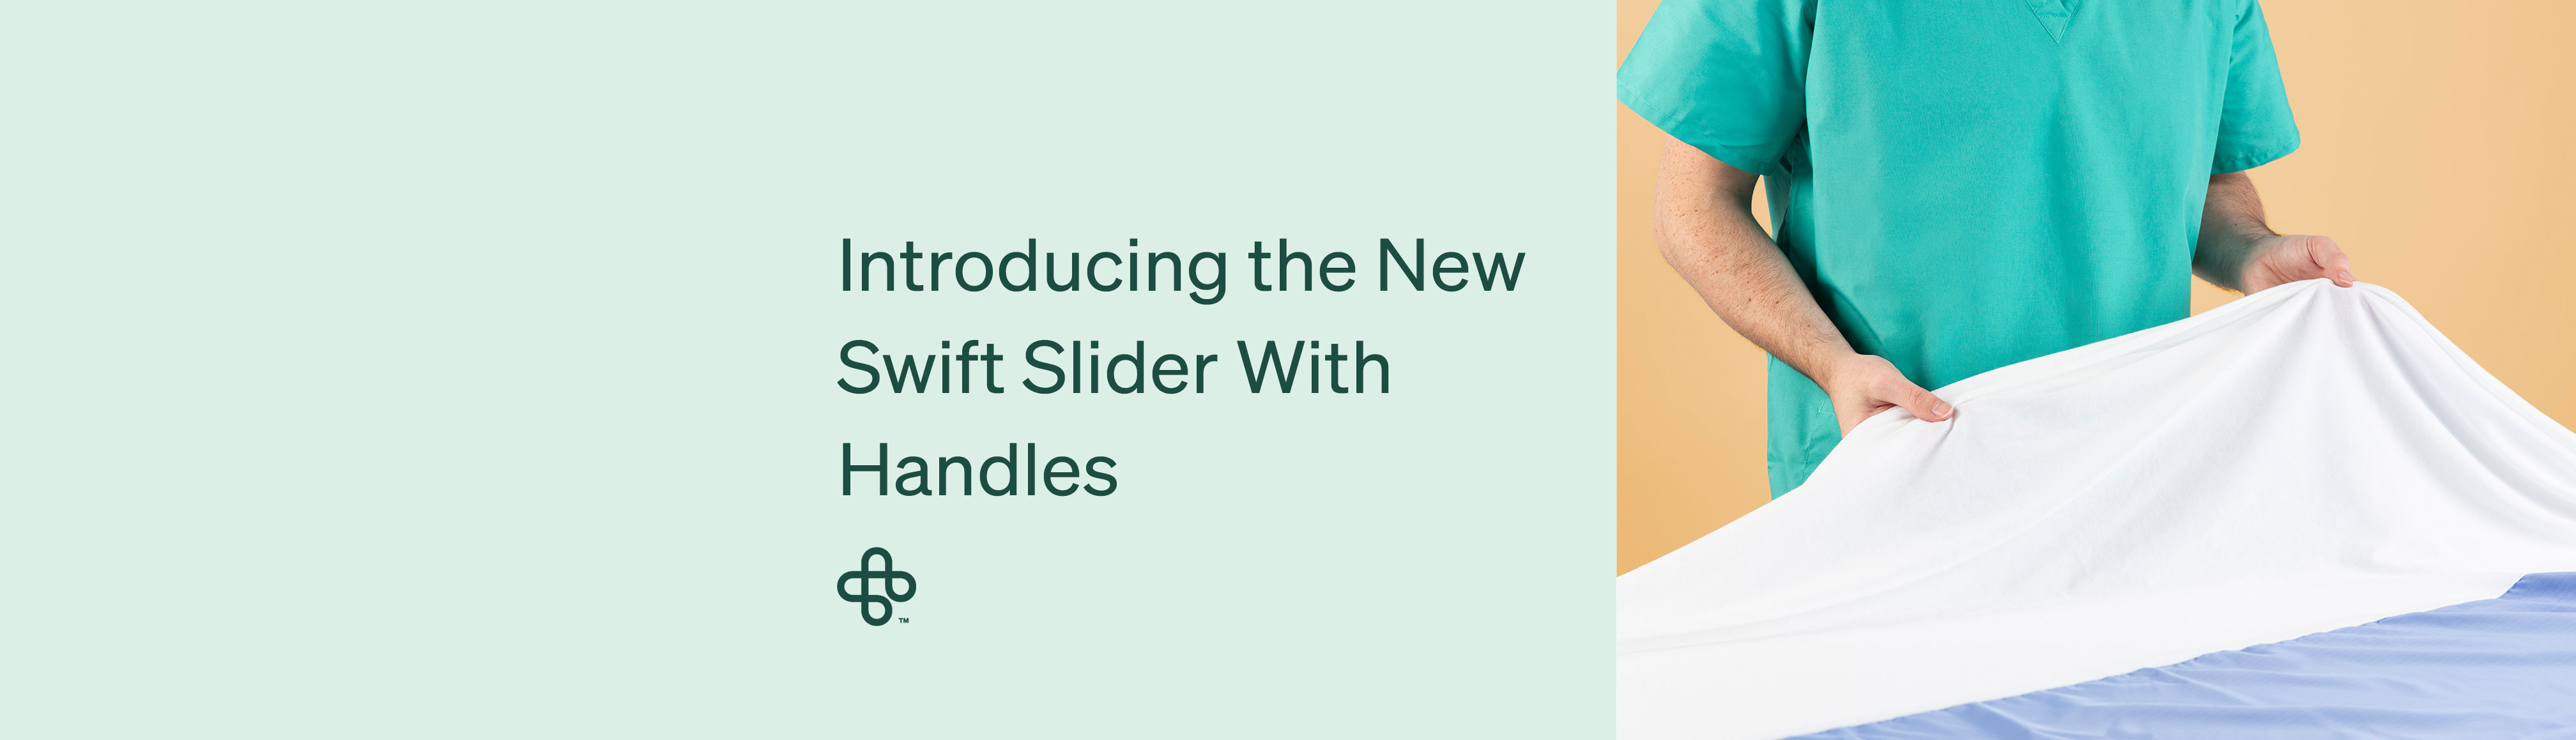 Introducing the New Swift Slider with Handles